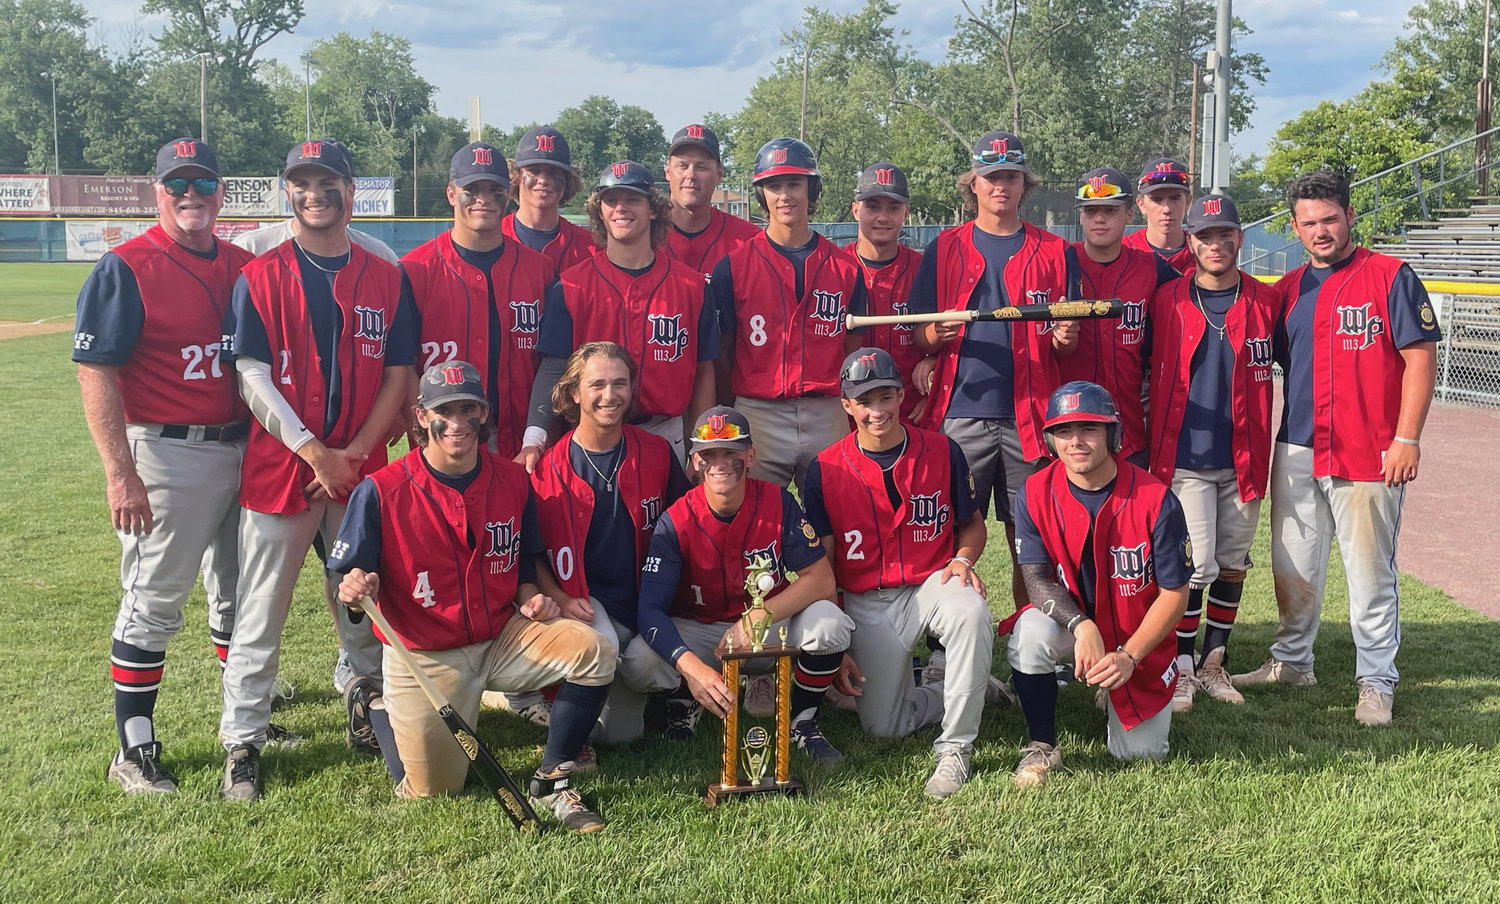 District V champion Whitestown Post finished runner-up in the American Legion state baseball tournament on Wednesday at Cantine Field in Saugerties. Whitestown lost to District VII champion Greece Post in the championship game 5-2. Whitestown ended its season at 23-4.